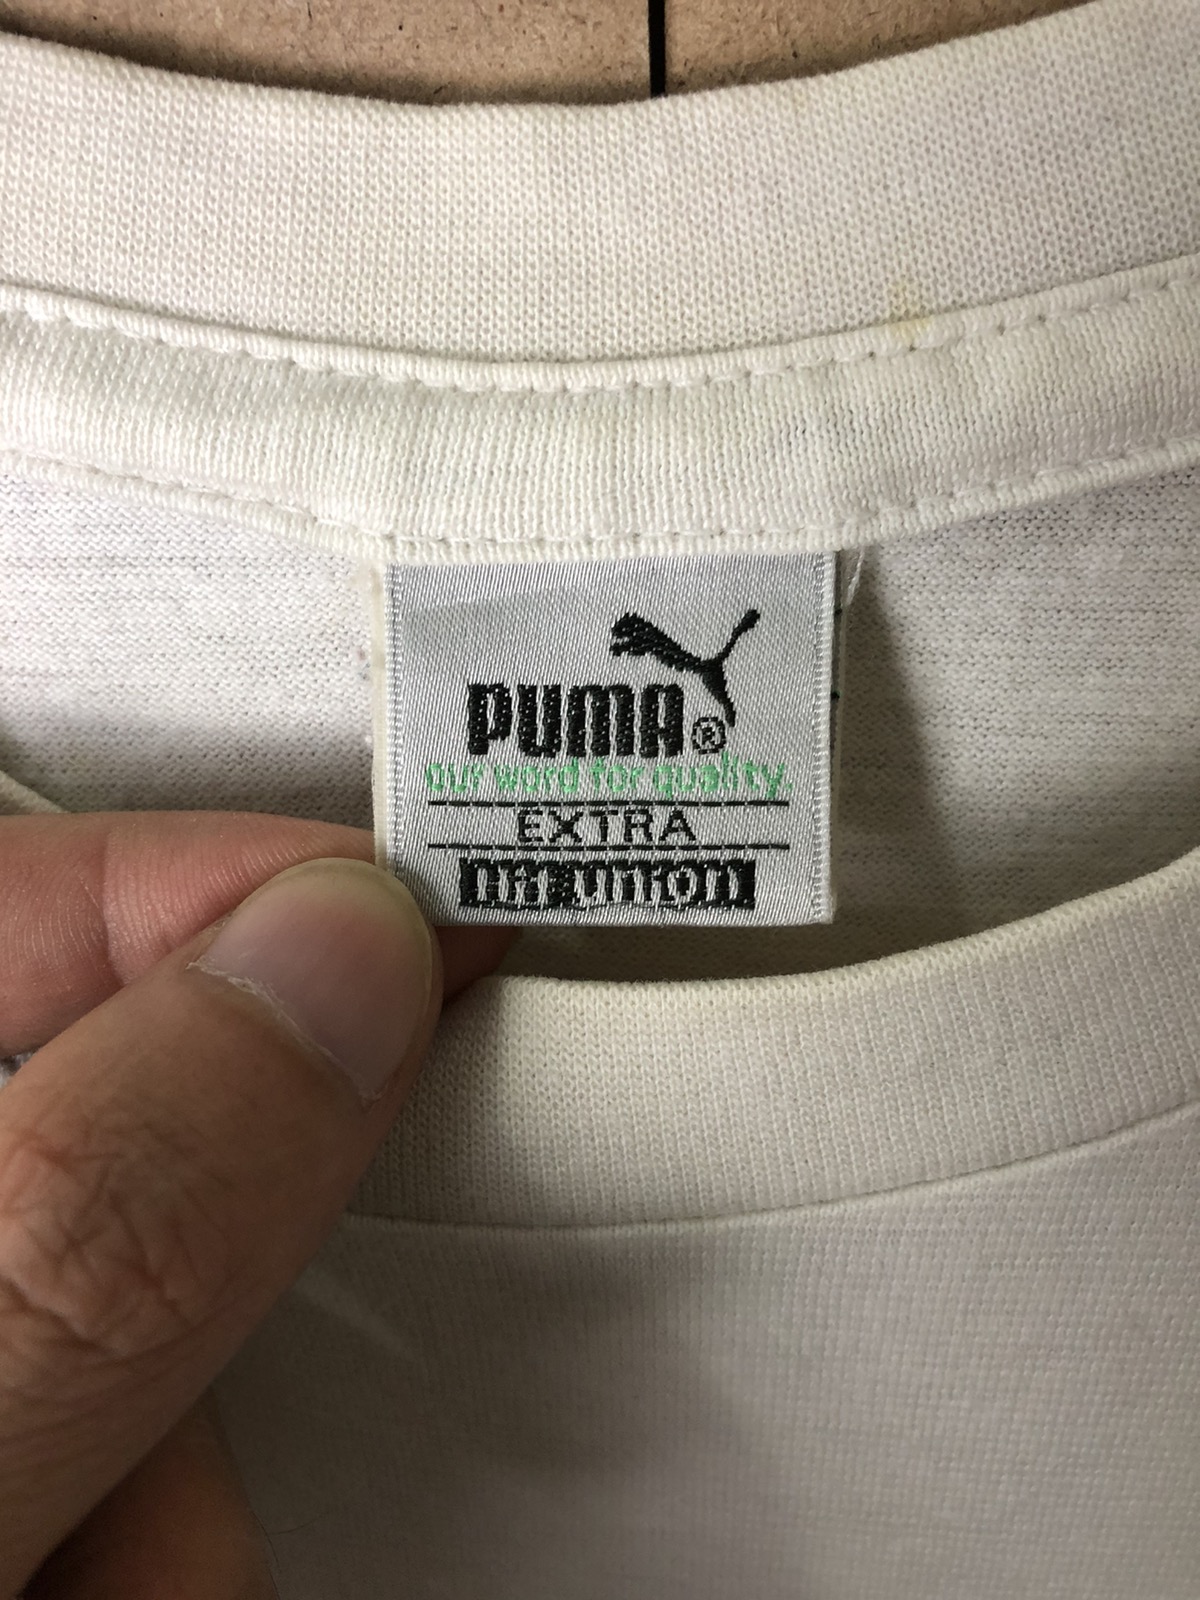 VTG 90s PUMA SHIRT AS FLUGELS WITH SPELL OUT BIG LOGO - 9